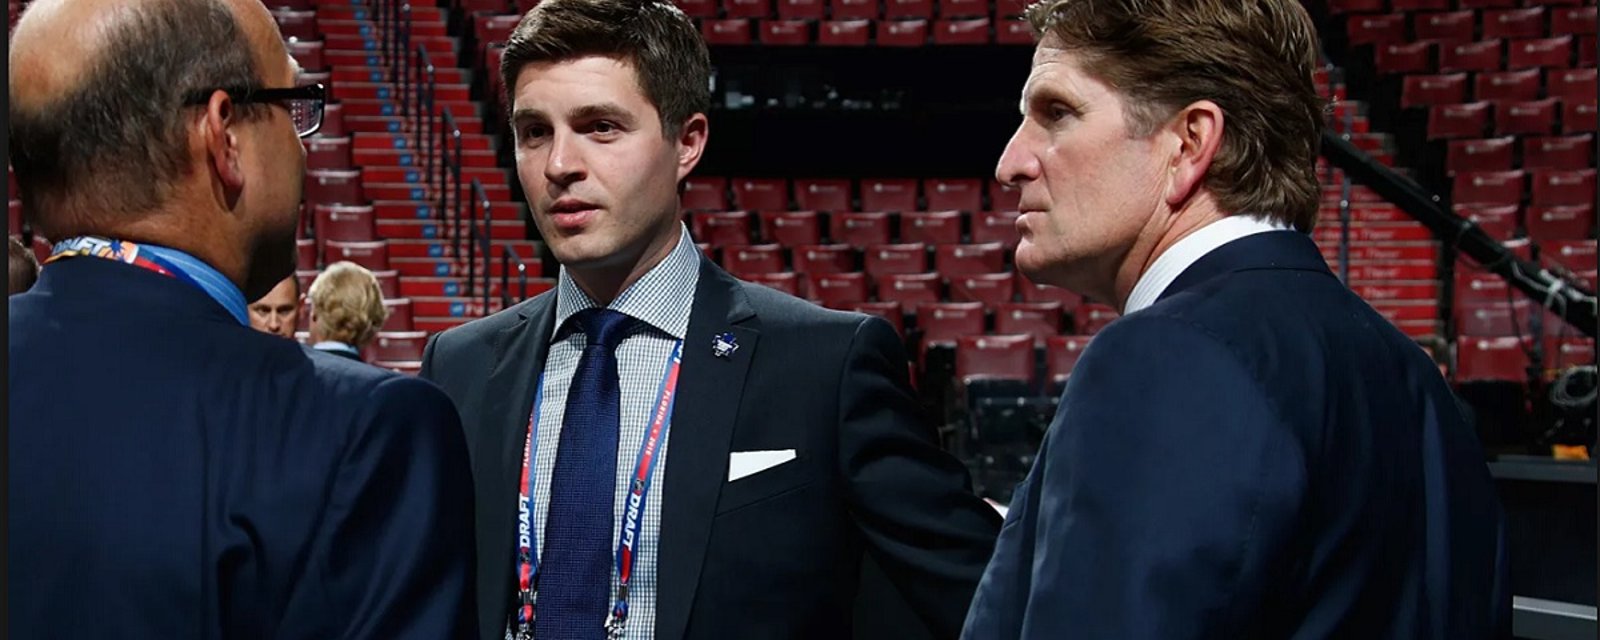 Leafs sign young forward, but it's not who fans were hoping for.